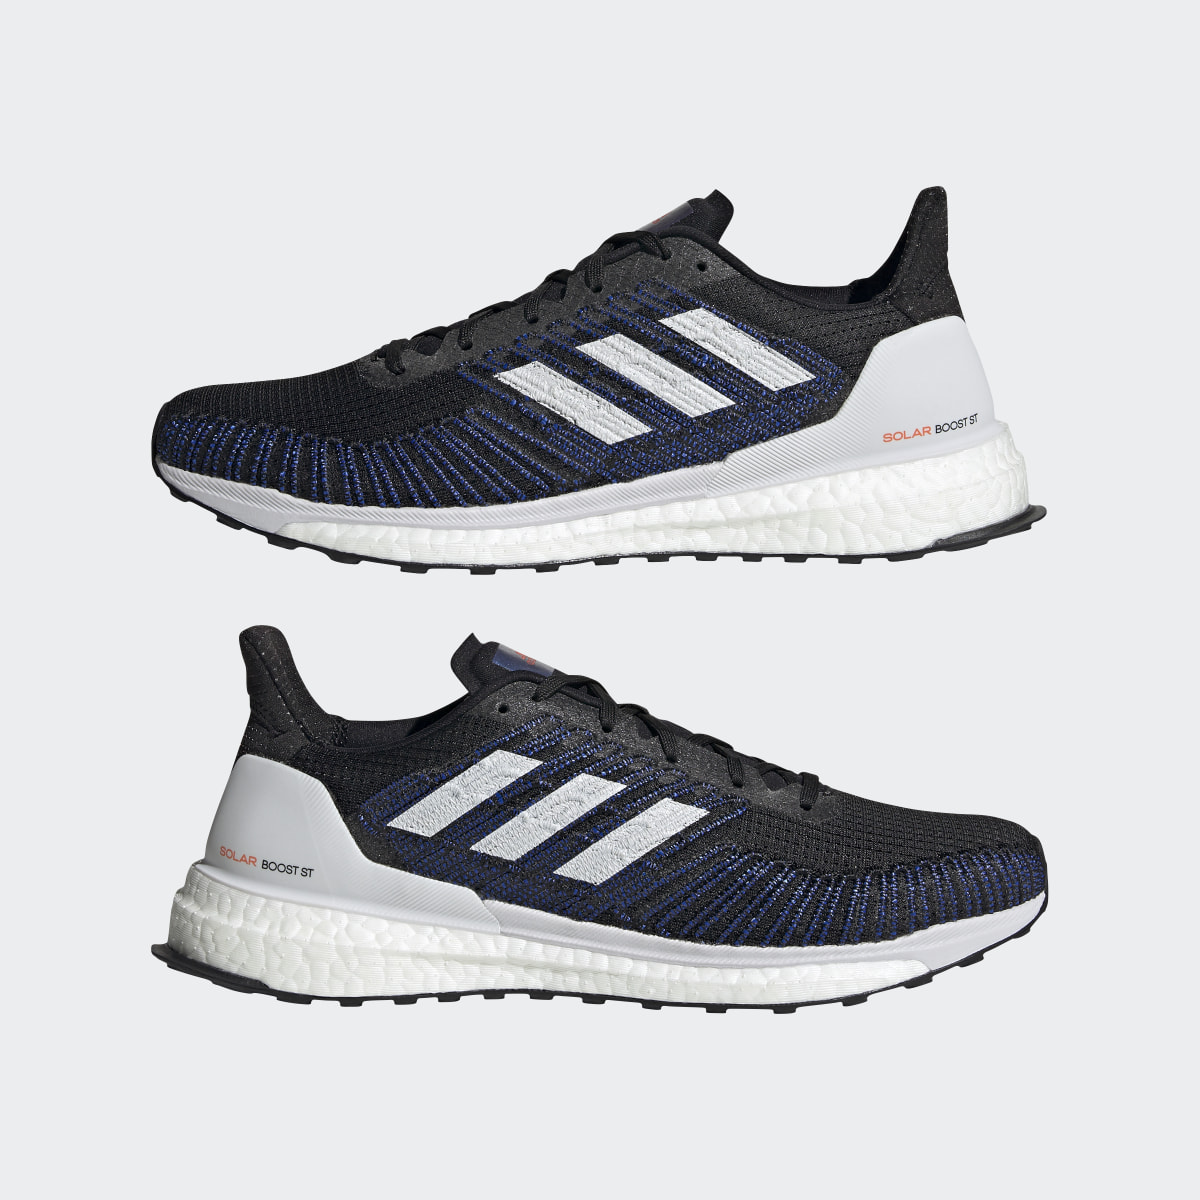 Adidas Solarboost ST 19 Shoes. 9